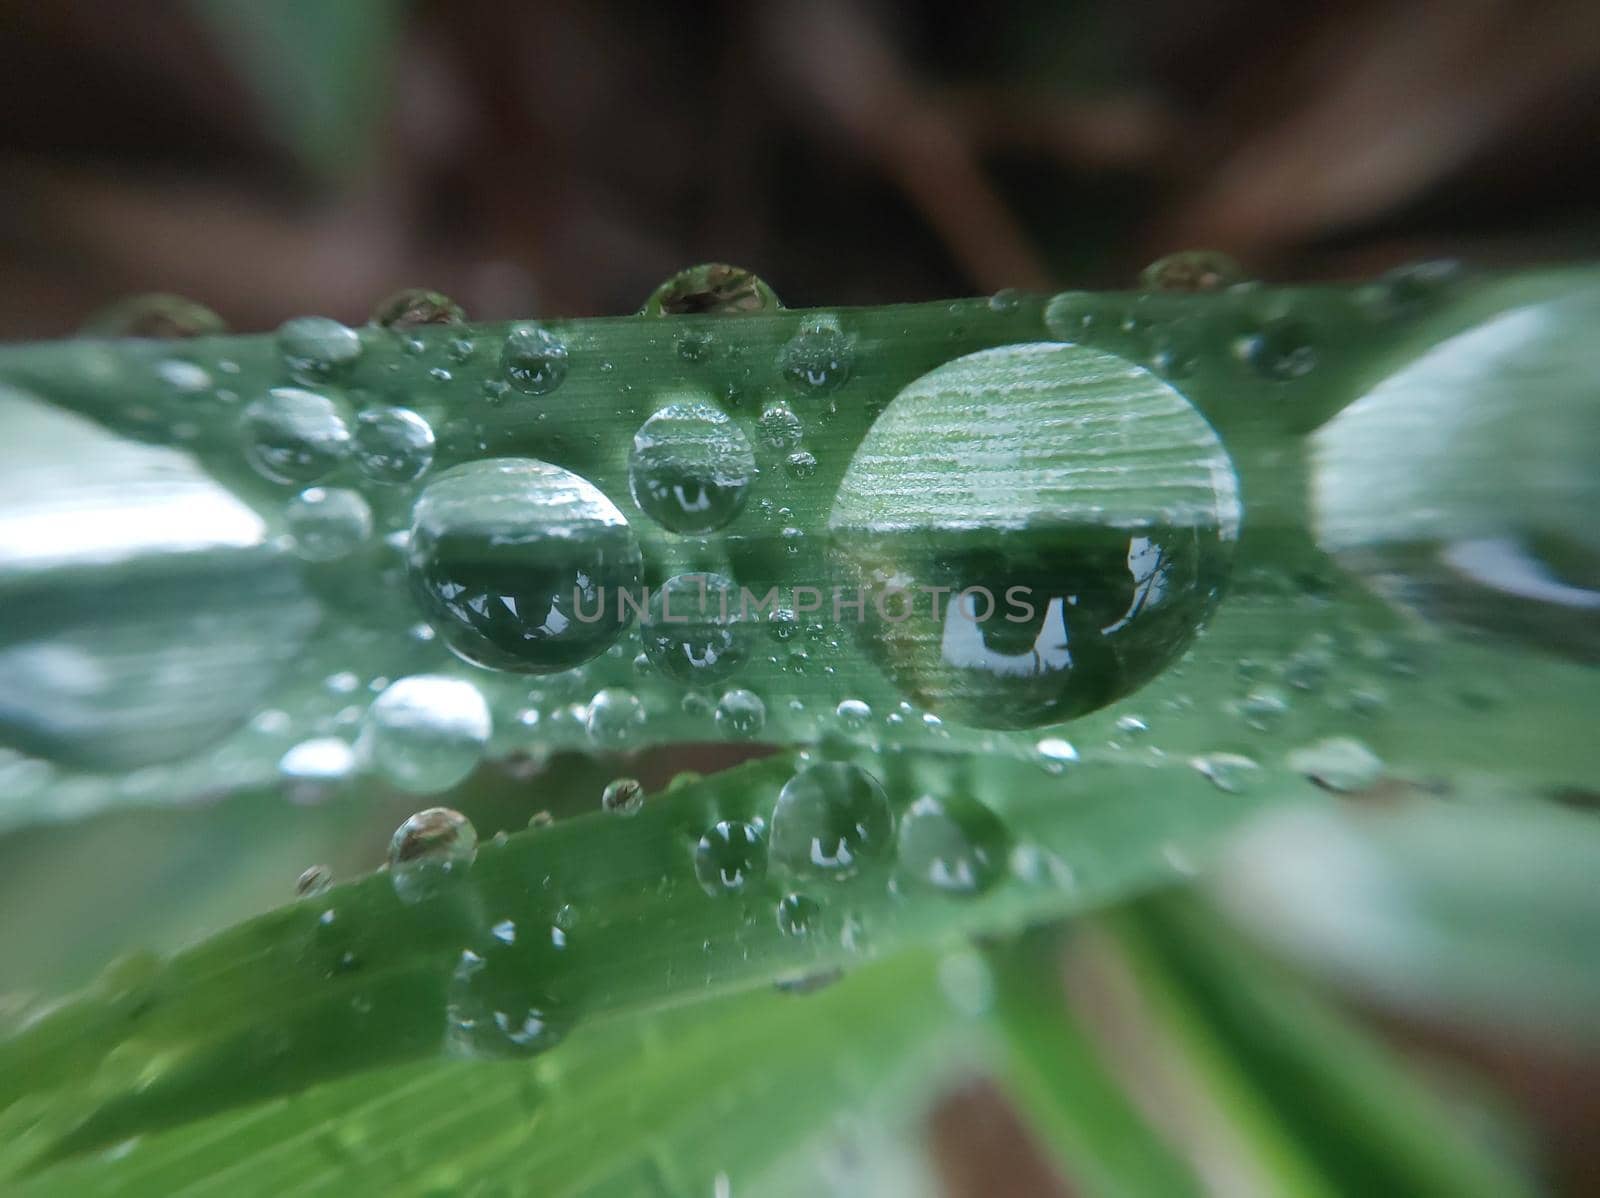 Fallen autumn morning dew on the leaves of plants by architectphd